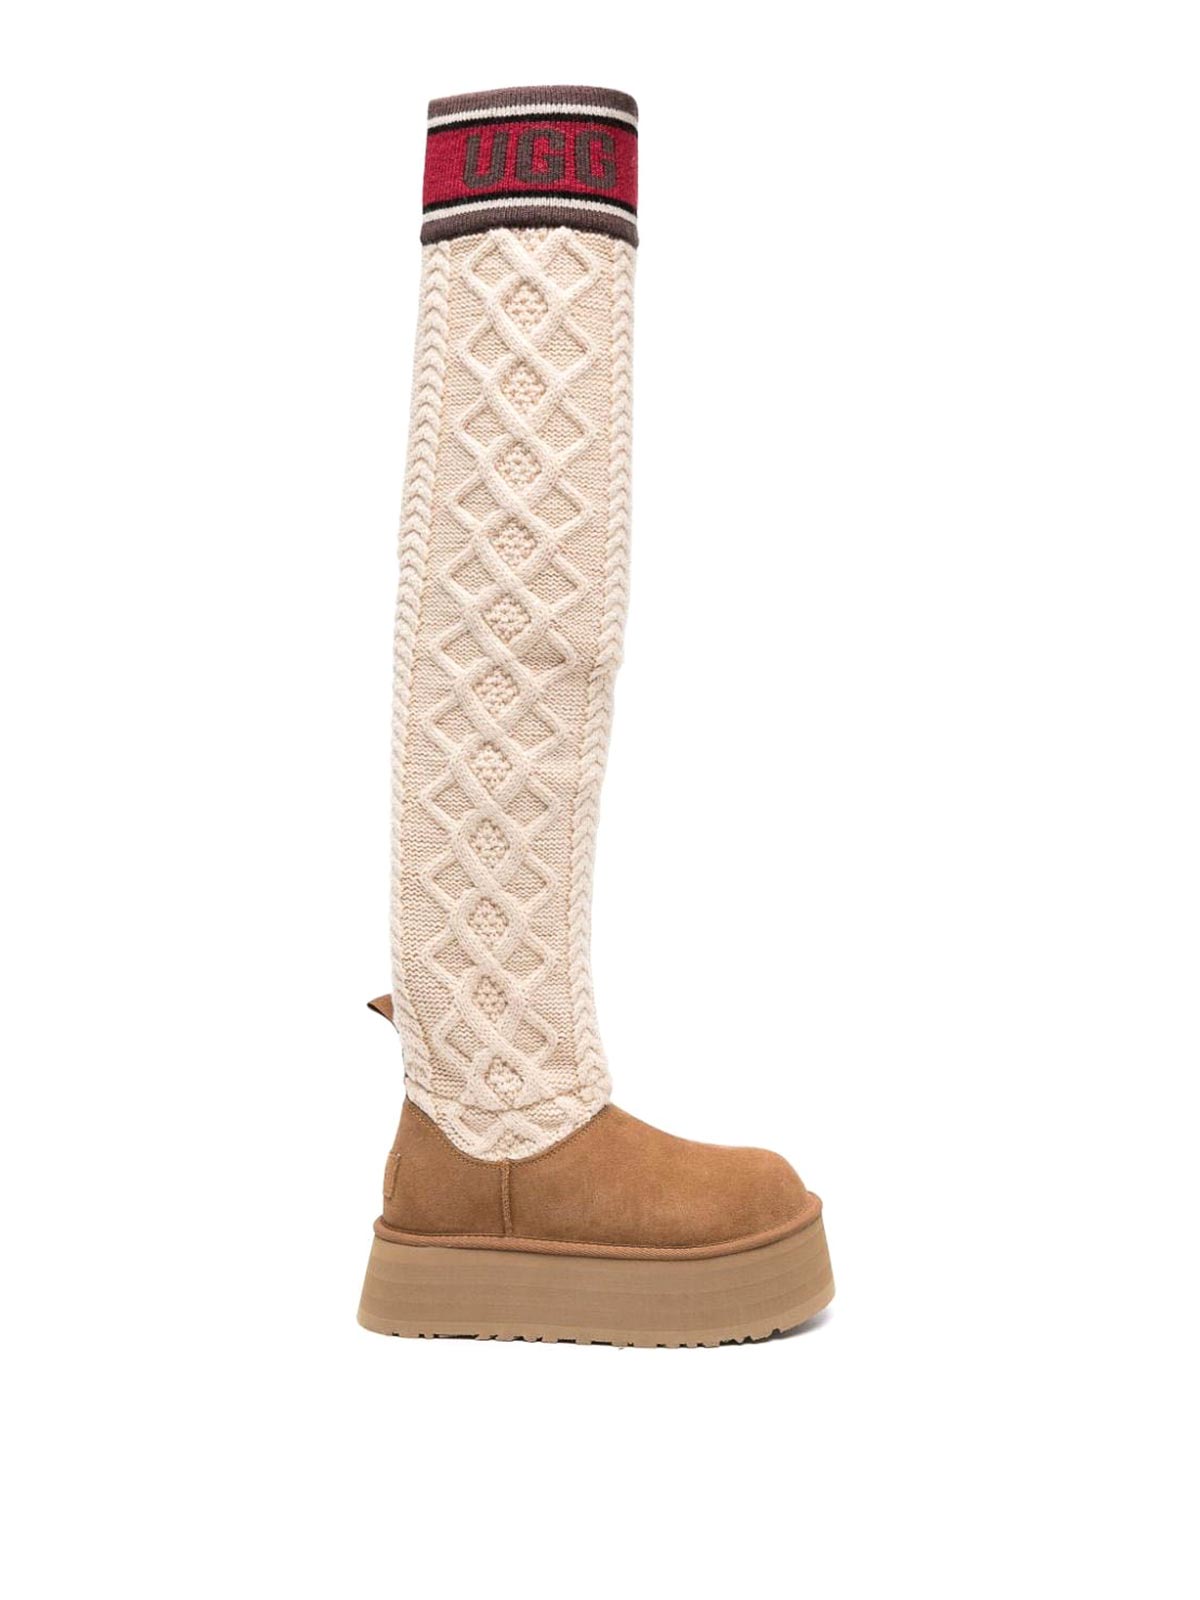 Boots Ugg - Classic sweater letter tall boots - 1144044CHESTNUT